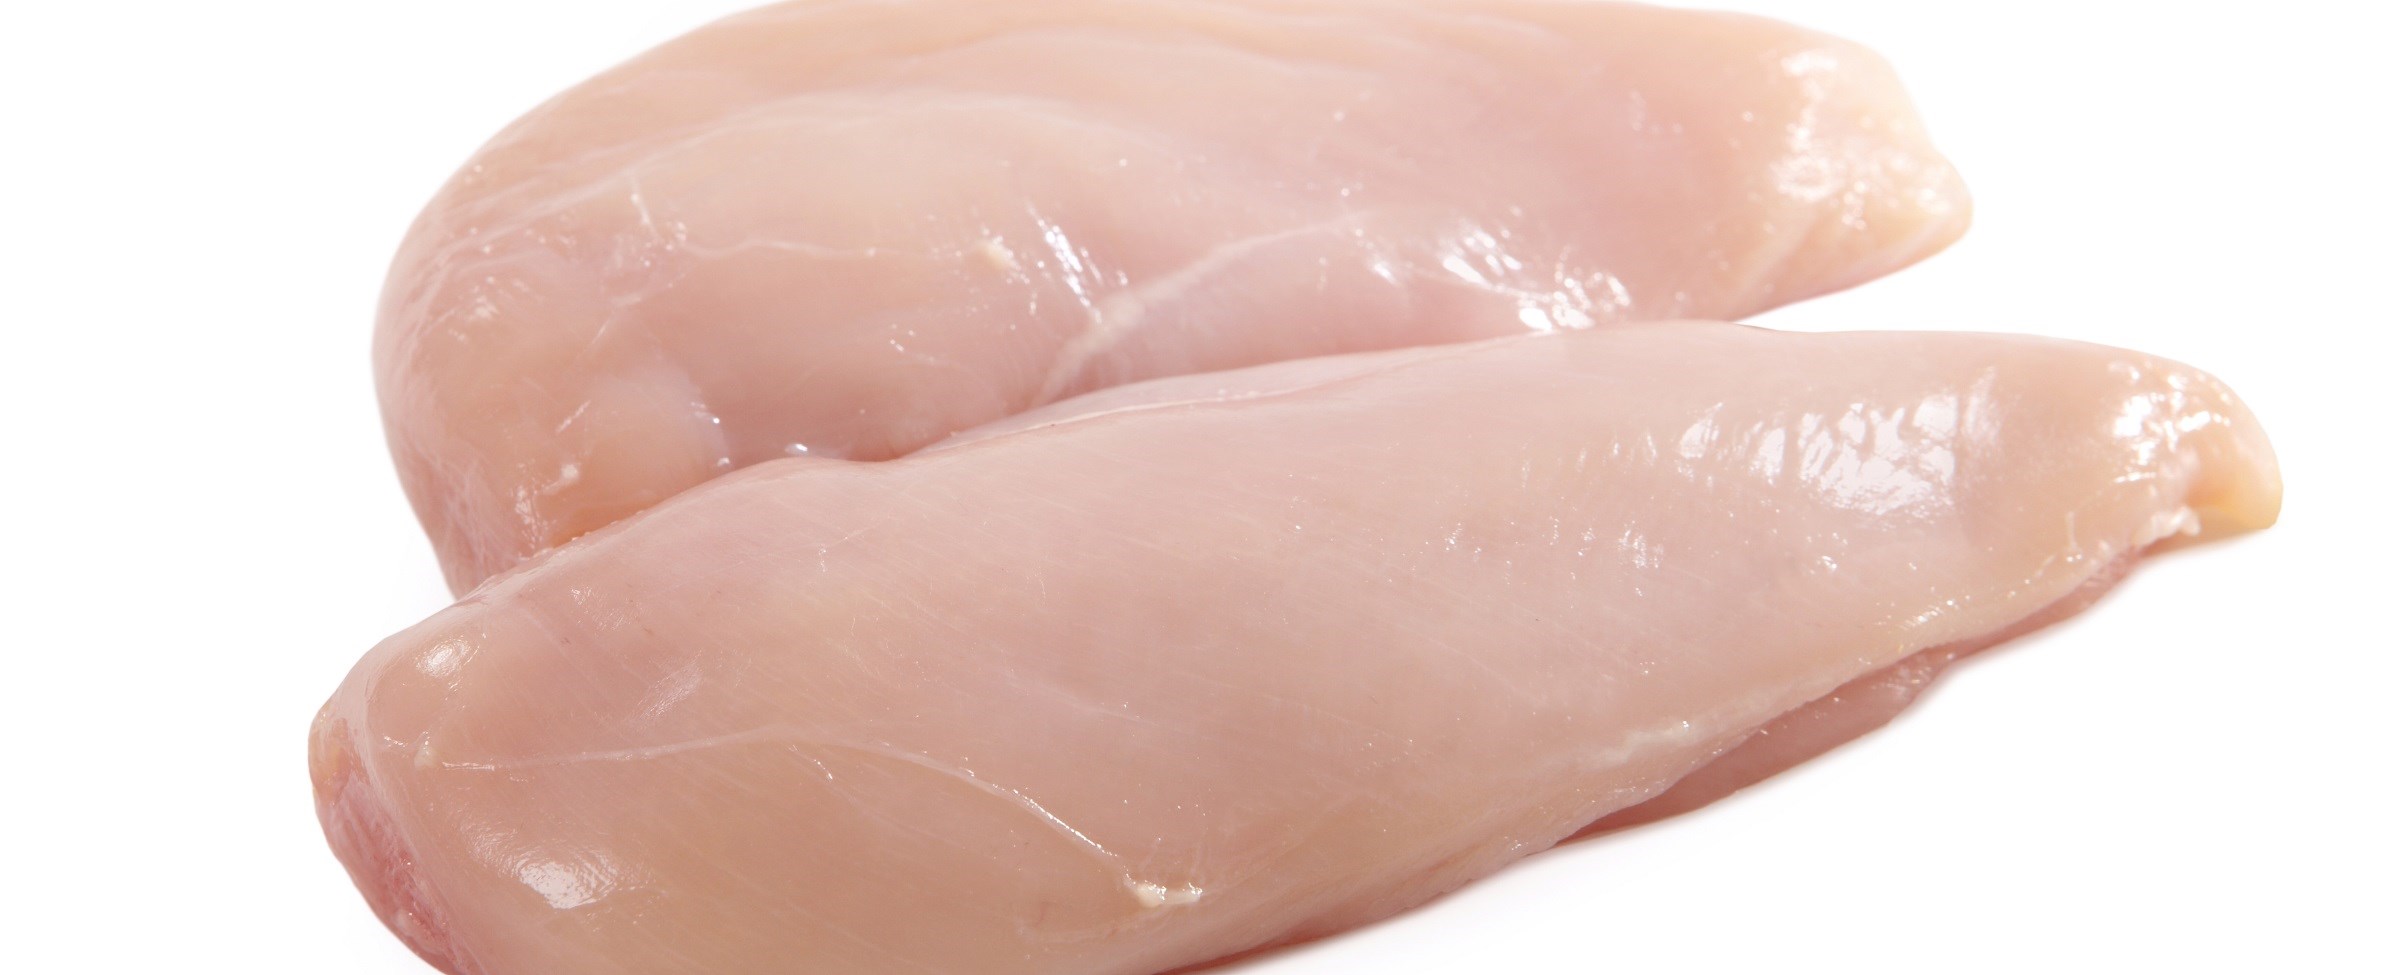 Ensuring quality carcass and meat in broilers